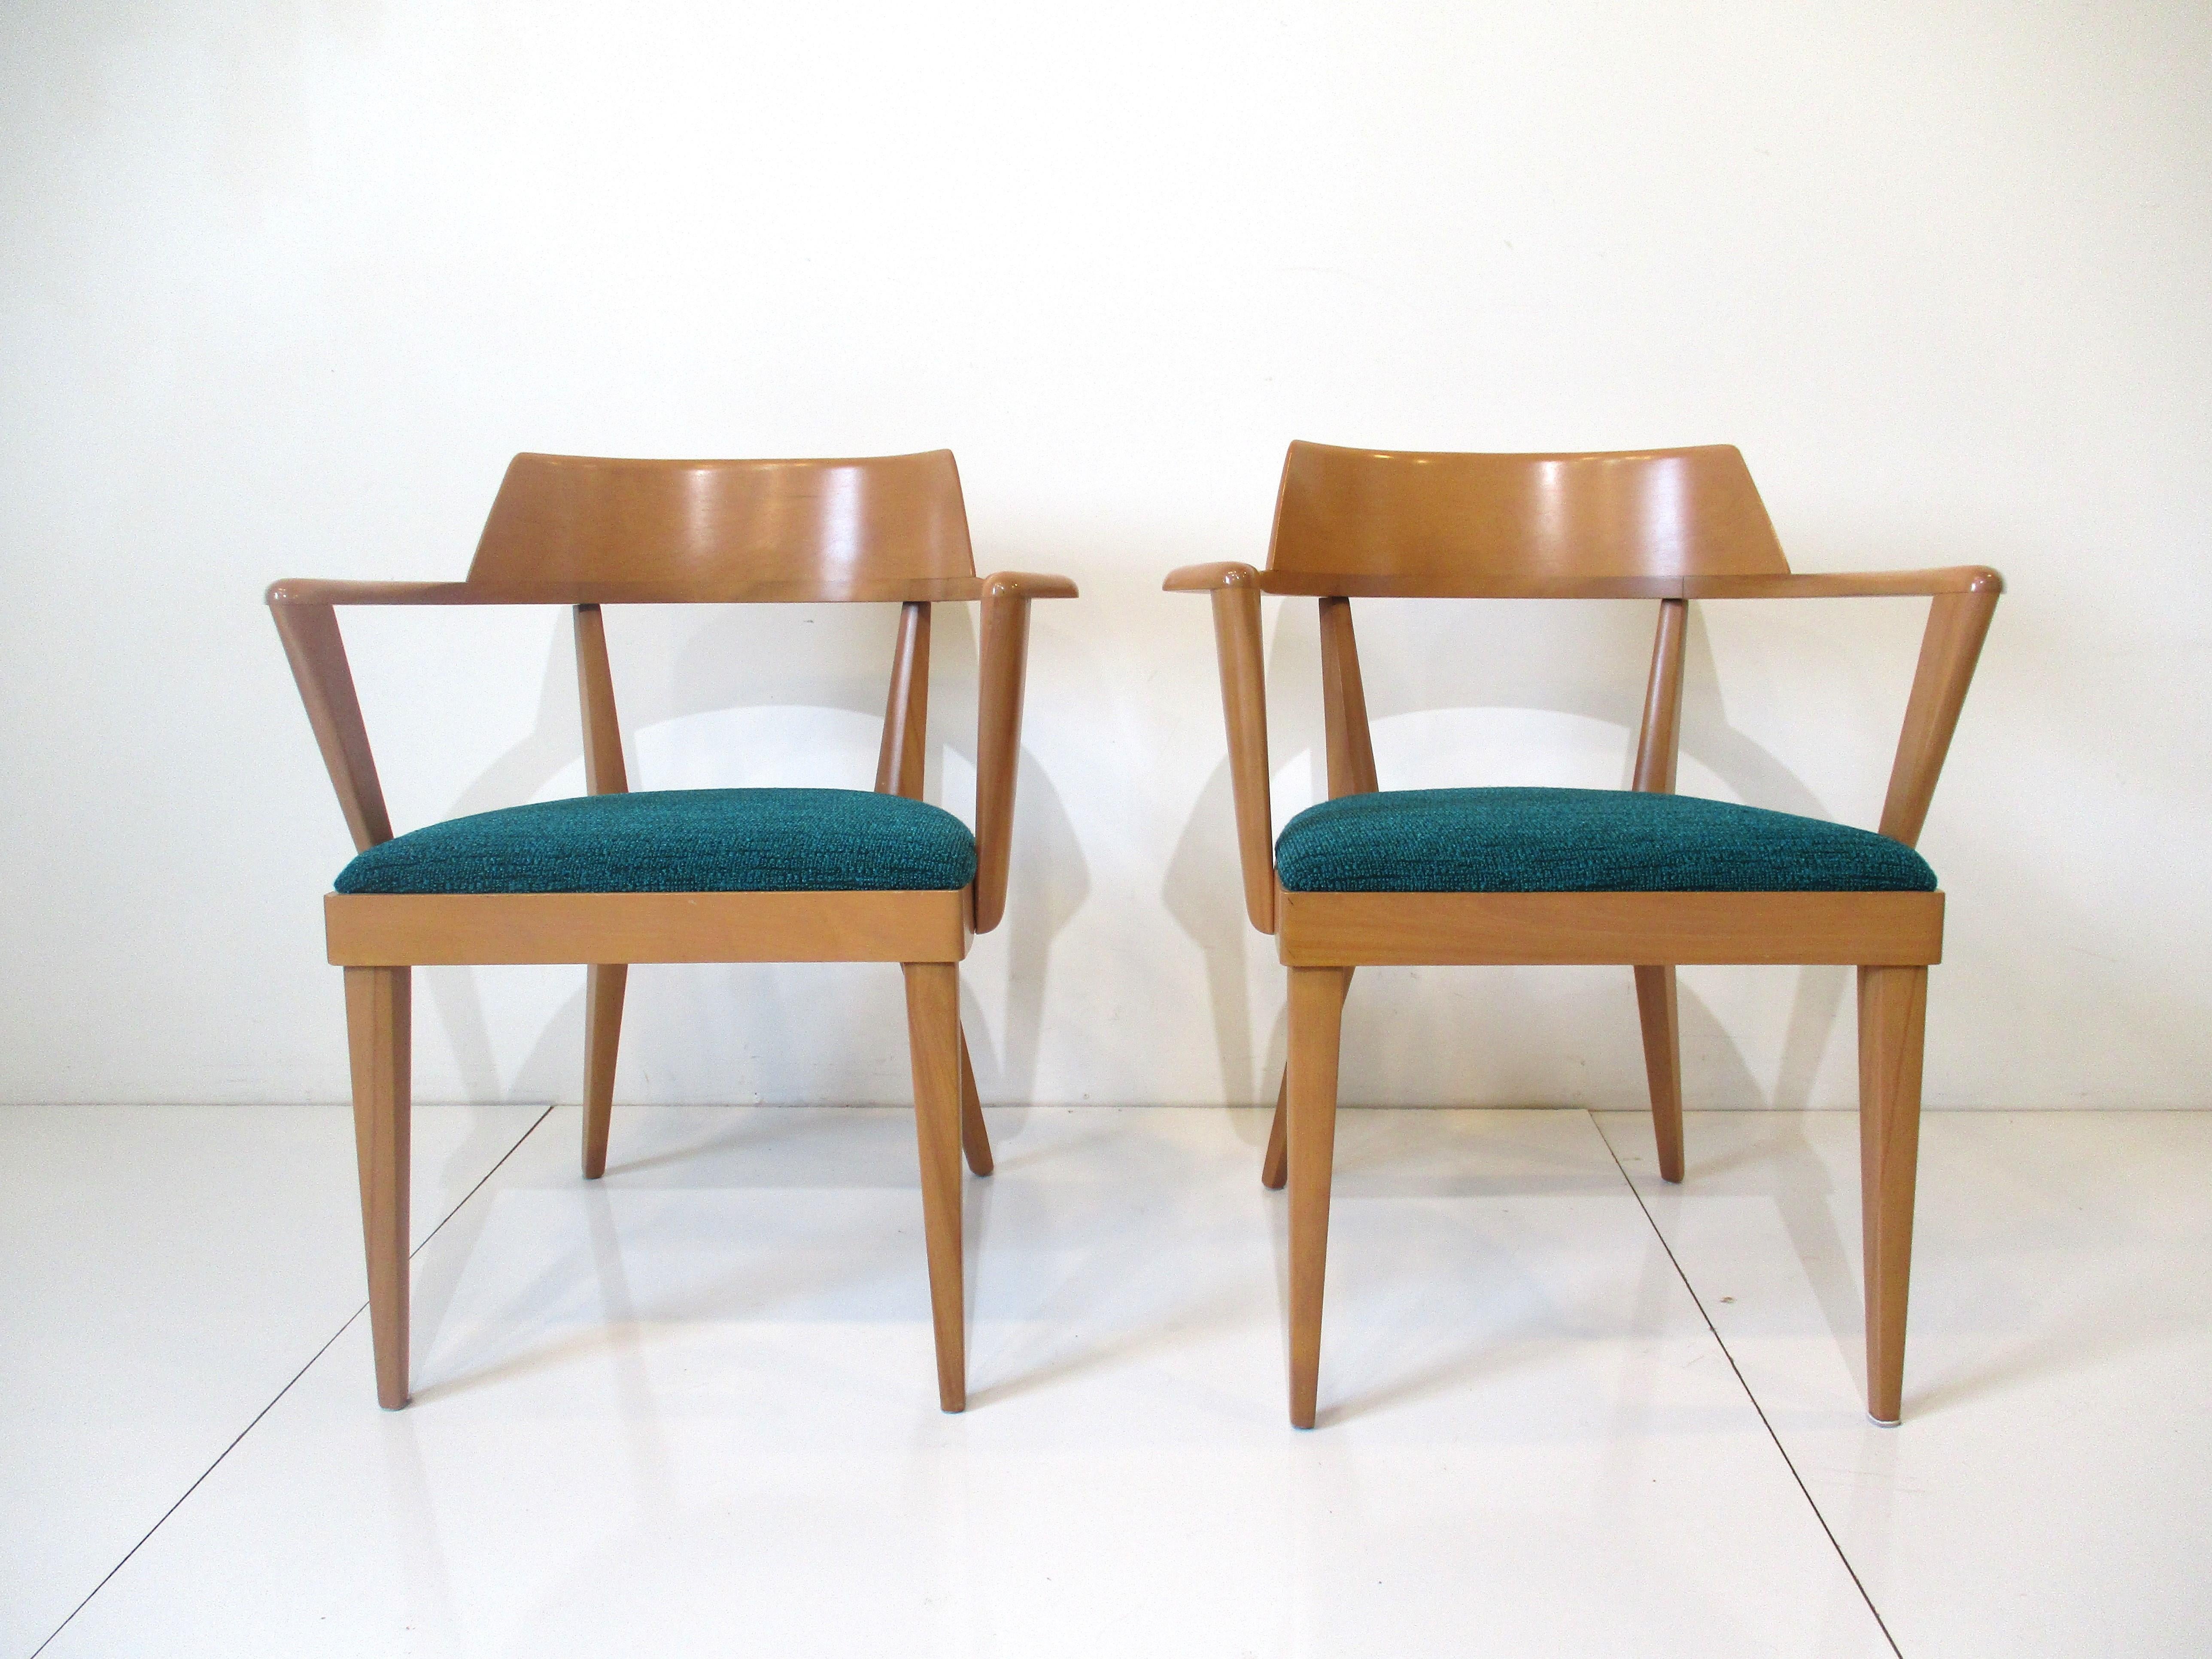 A pair of very well crafted solid maple wood arm chairs with great wood grain and in the original sea blue green fabric . Designed by Leo Jiranek and Ernest Herrmann having a curved backside and arms that are stylishly jetting outward  giving the